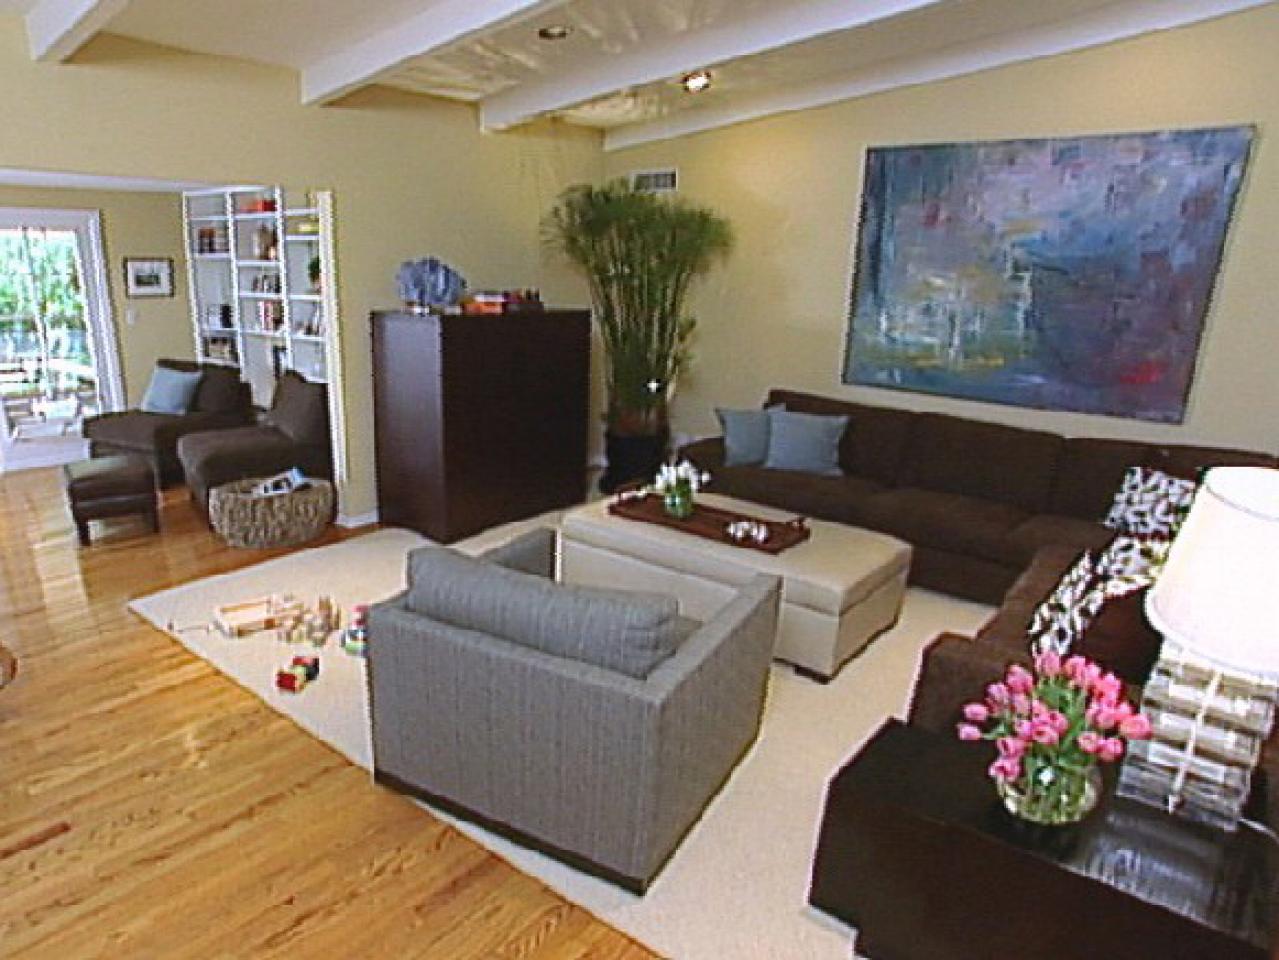 Hgtv Gives The Details On Contemporary Decor Hgtv